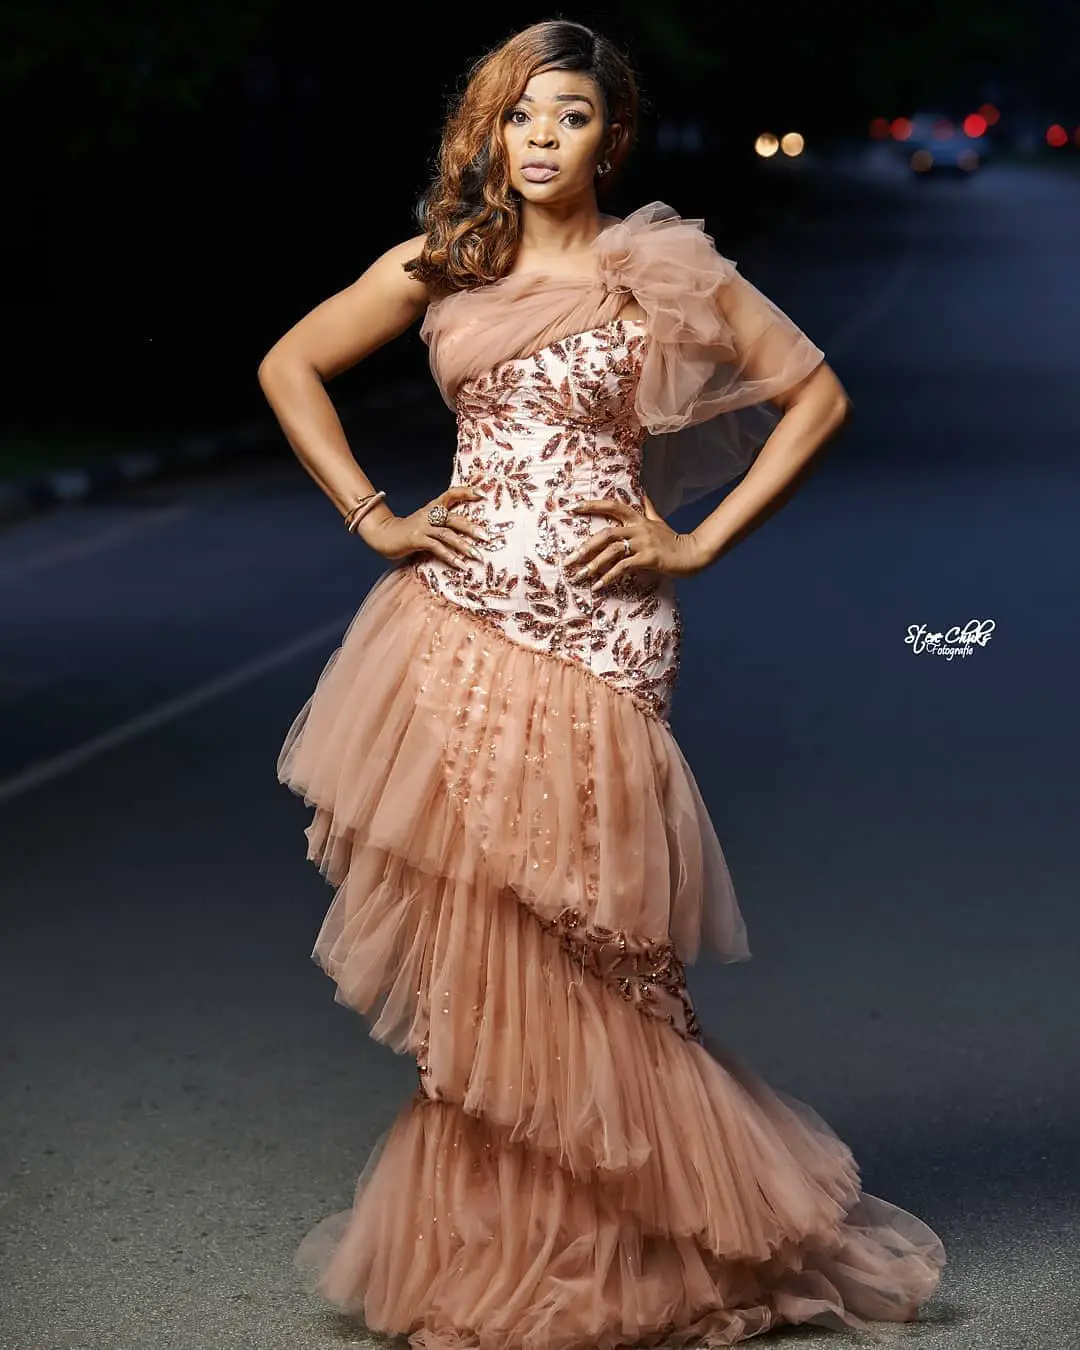 One Word For These Trendy Bridal Reception Outfits: Wow!!